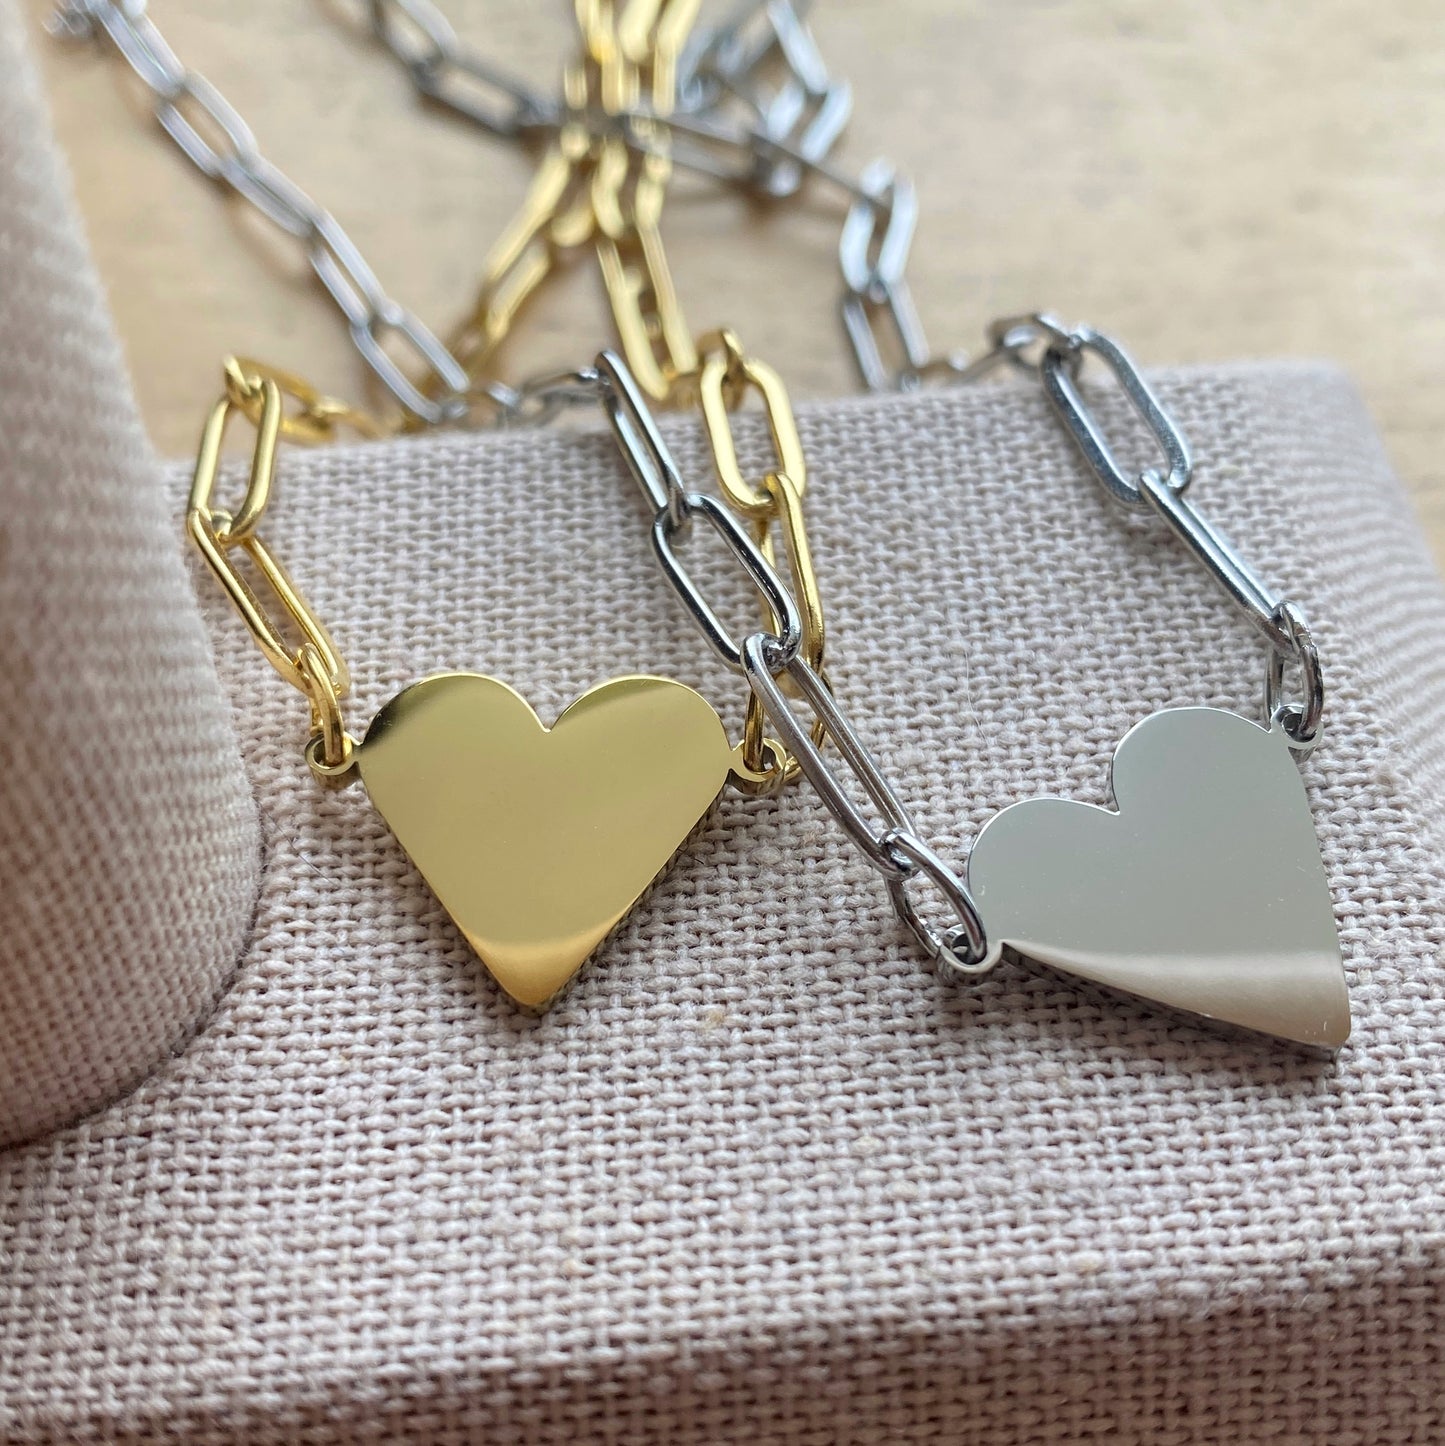 Waterproof Stainless Steel Heart Necklace Silver or Gold Water Safe Jewelry